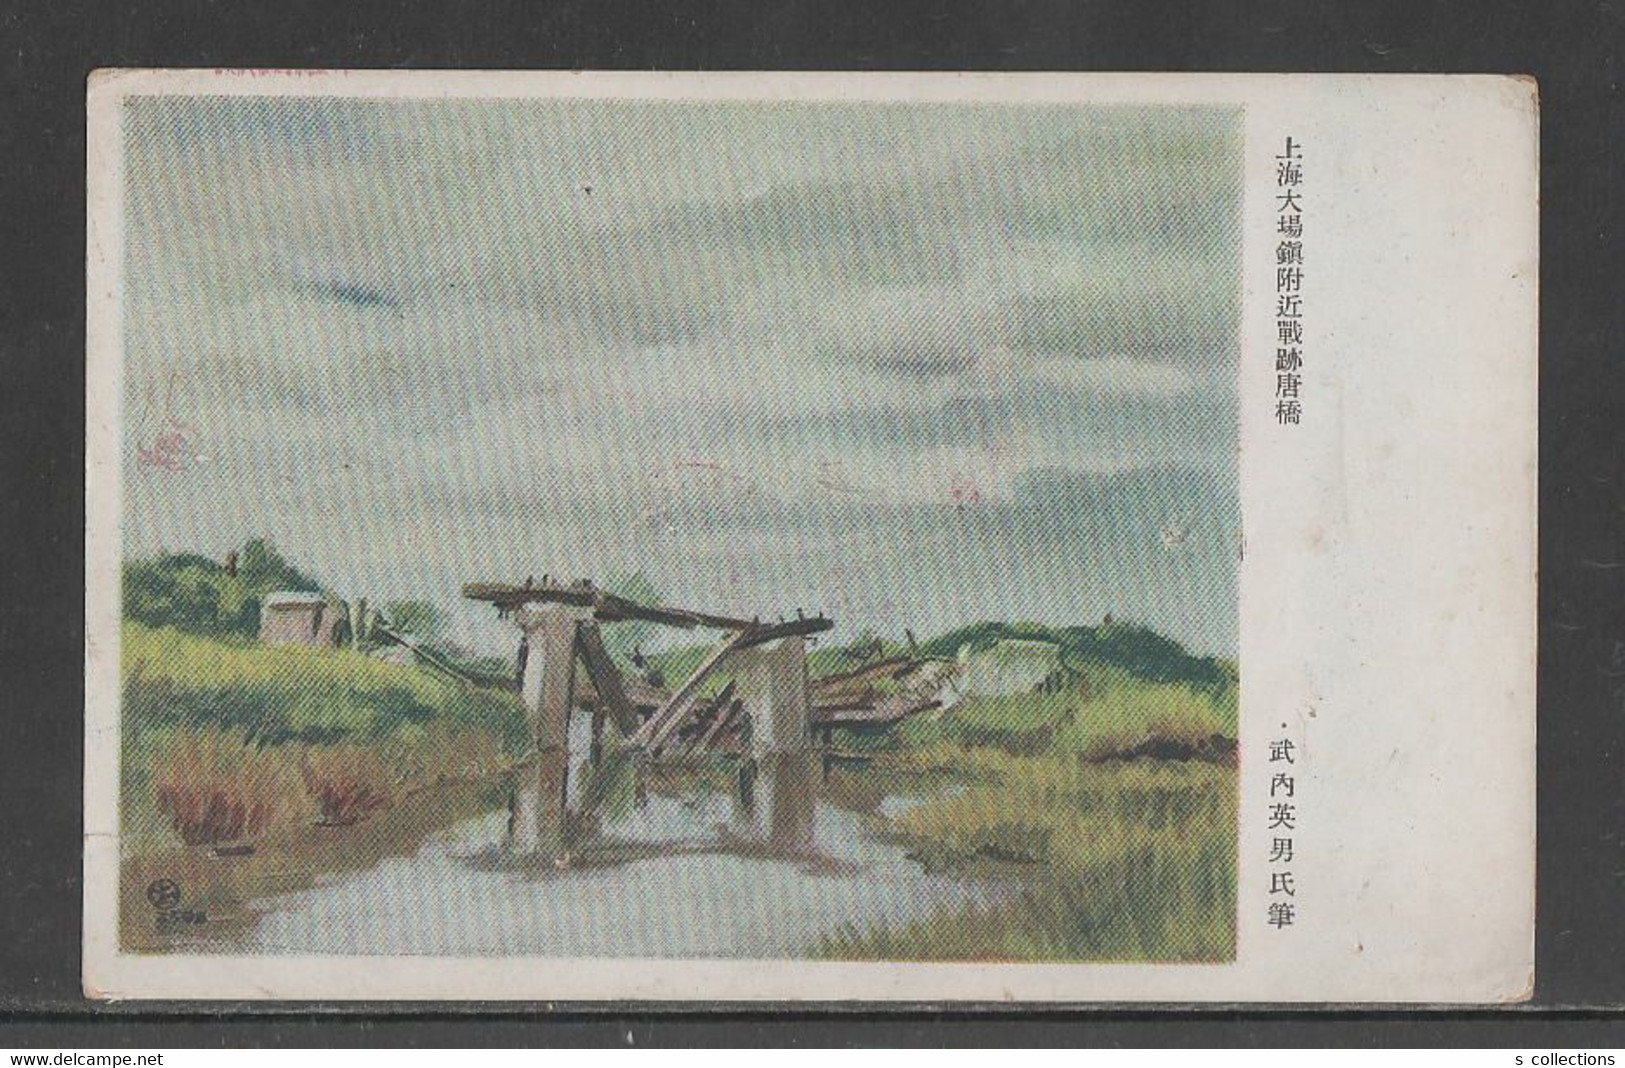 JAPAN WWII Military SHANGHAI Picture Postcard CENTRAL CHINA WW2 MANCHURIA CHINE MANDCHOUKOUO JAPON GIAPPONE - 1943-45 Shanghai & Nanjing